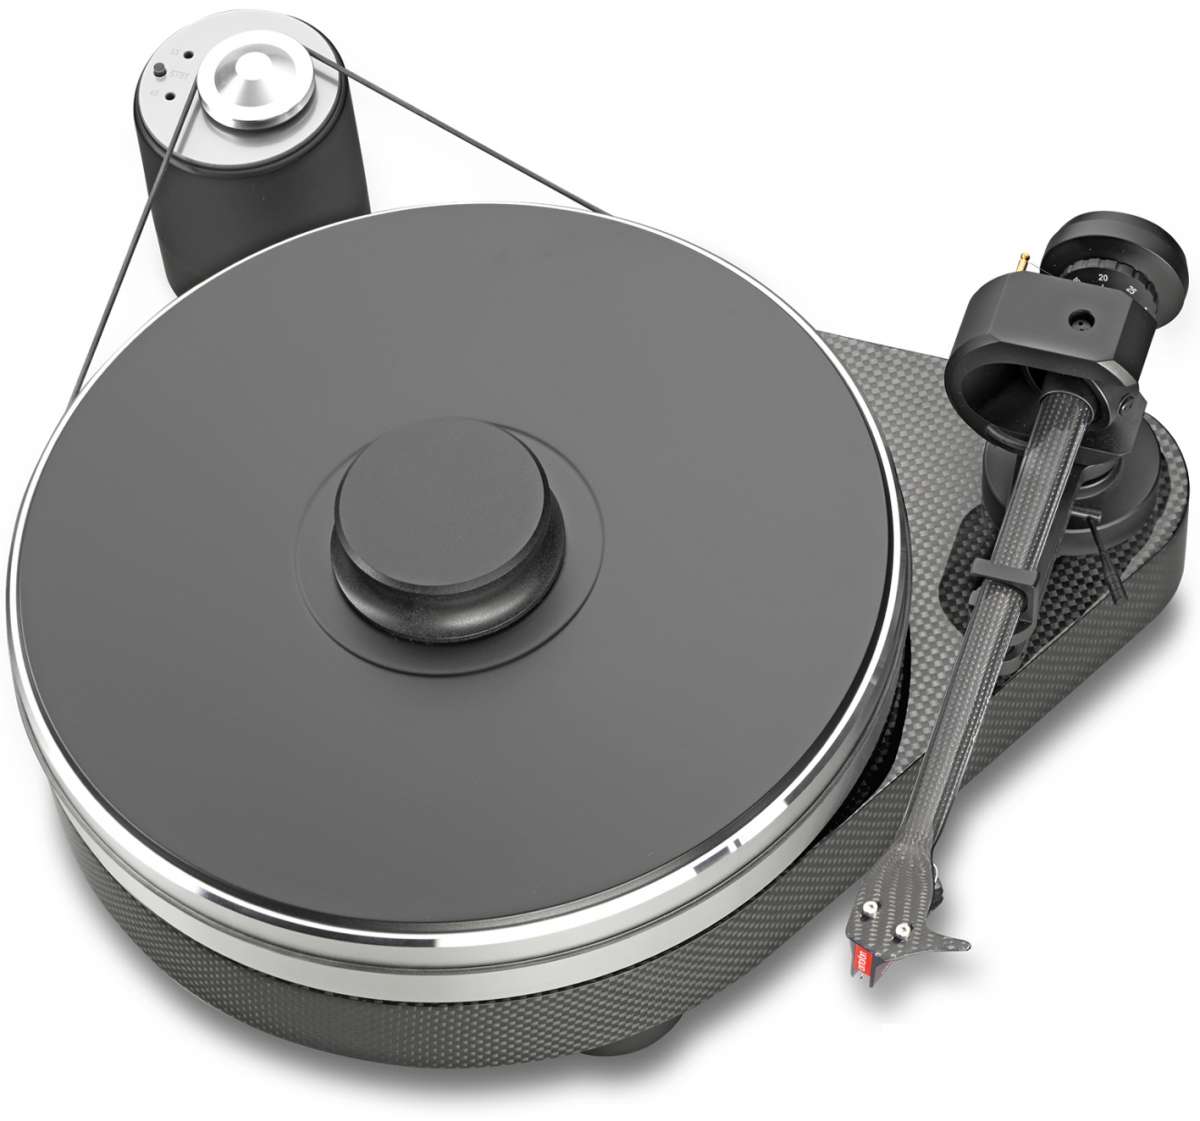 Pro-Ject RPM 9 Carbon Turntable